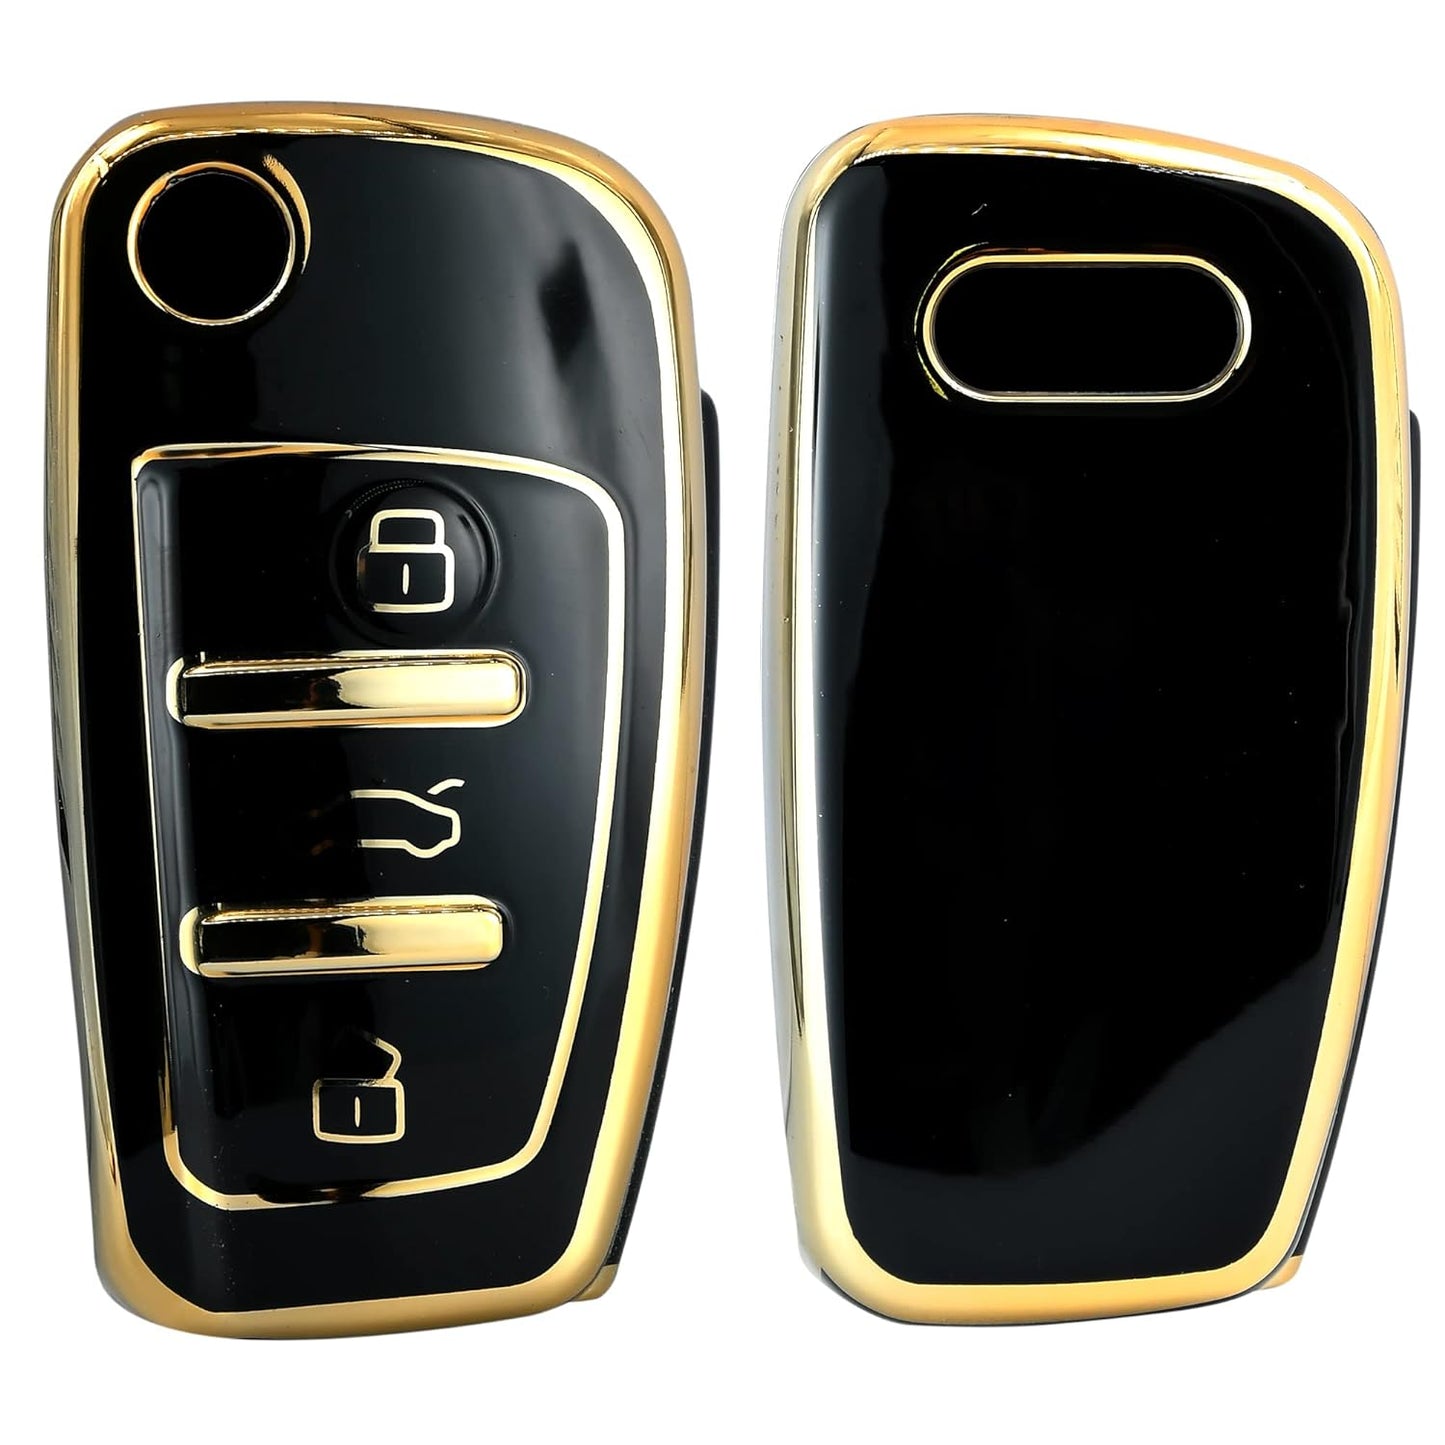 
                  
                    KMH TPU Gold Car Key Cover Compatible with Audi A1 A3 A6 Q2 Q3 Q7 TT TTS R8 S3 S6 RS3 Smart Key Cover (Pack of 2, Black-White)-TPU GOLD KEY COVER-KMH-CARPLUS
                  
                